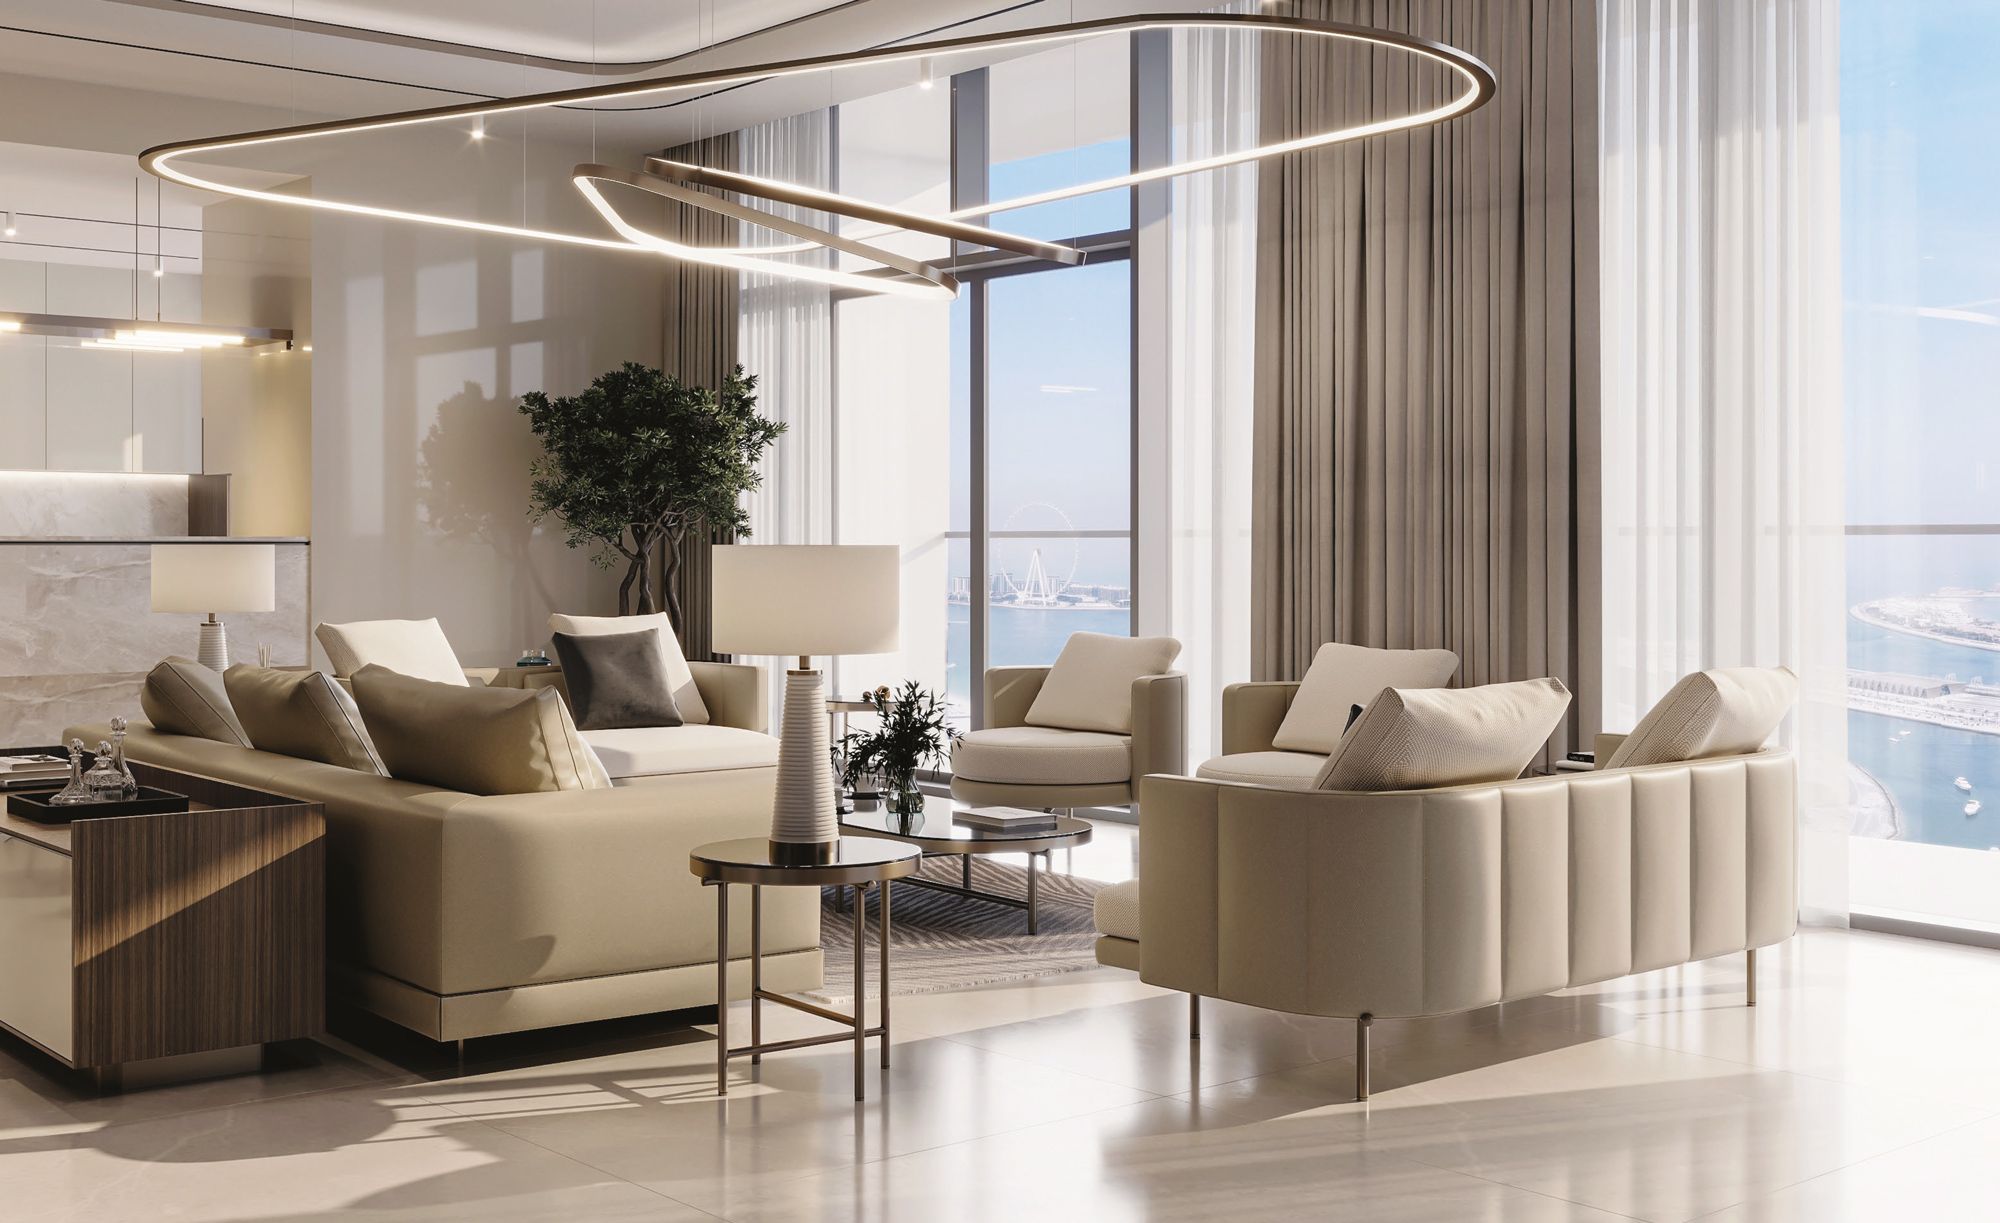 Sitting Area at Sobha Seahaven Sky Edition